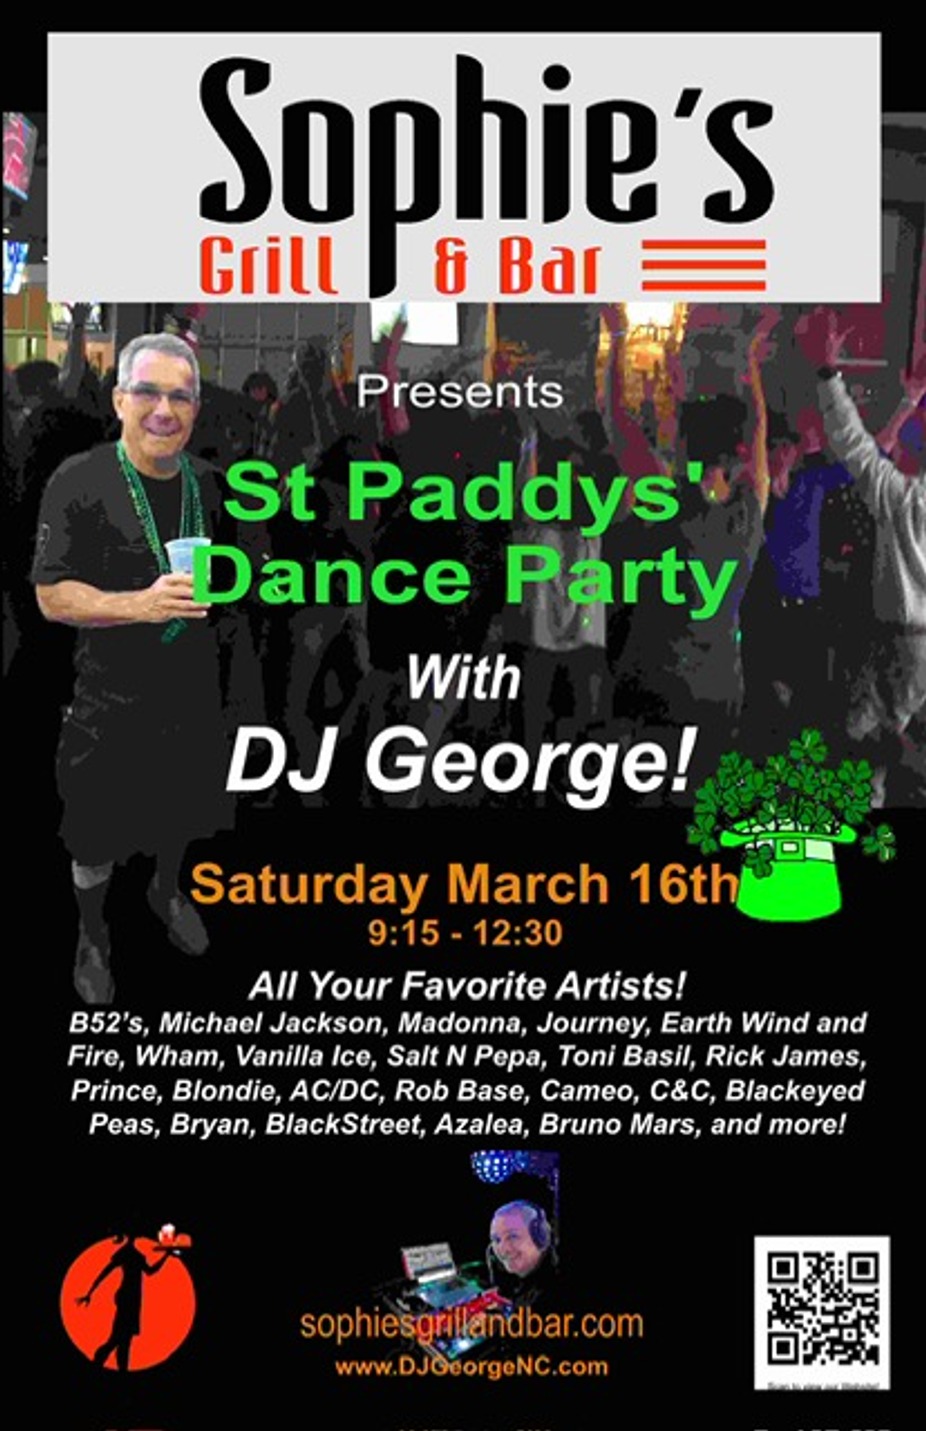 St. Paddy's Dance Party event photo